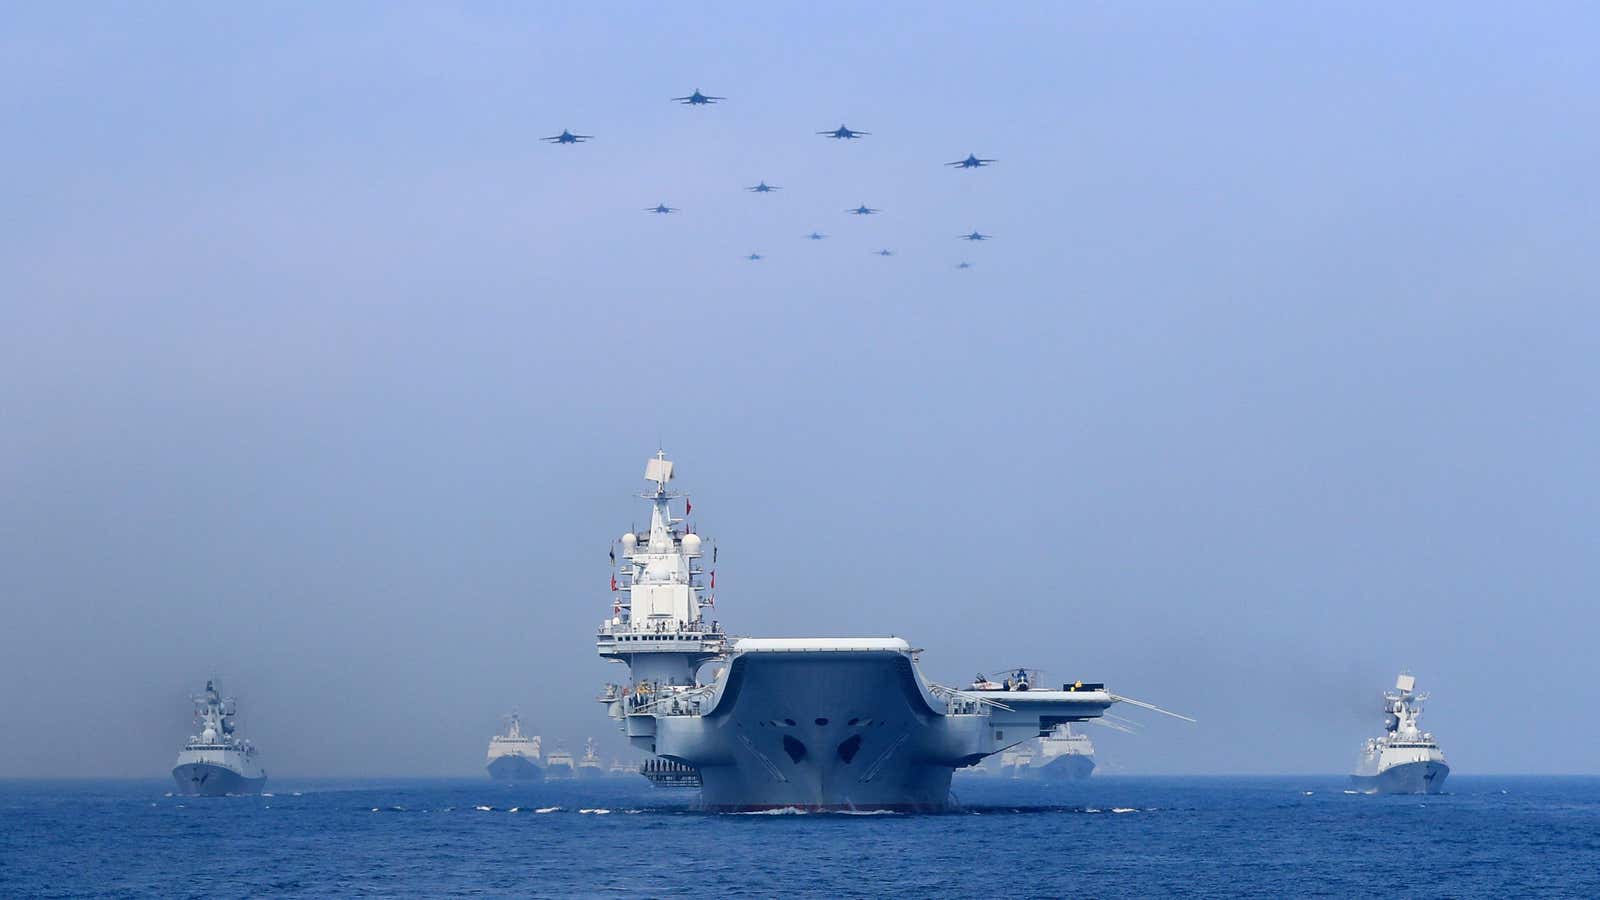 The Chinese navy showing off in the South China Sea in April.